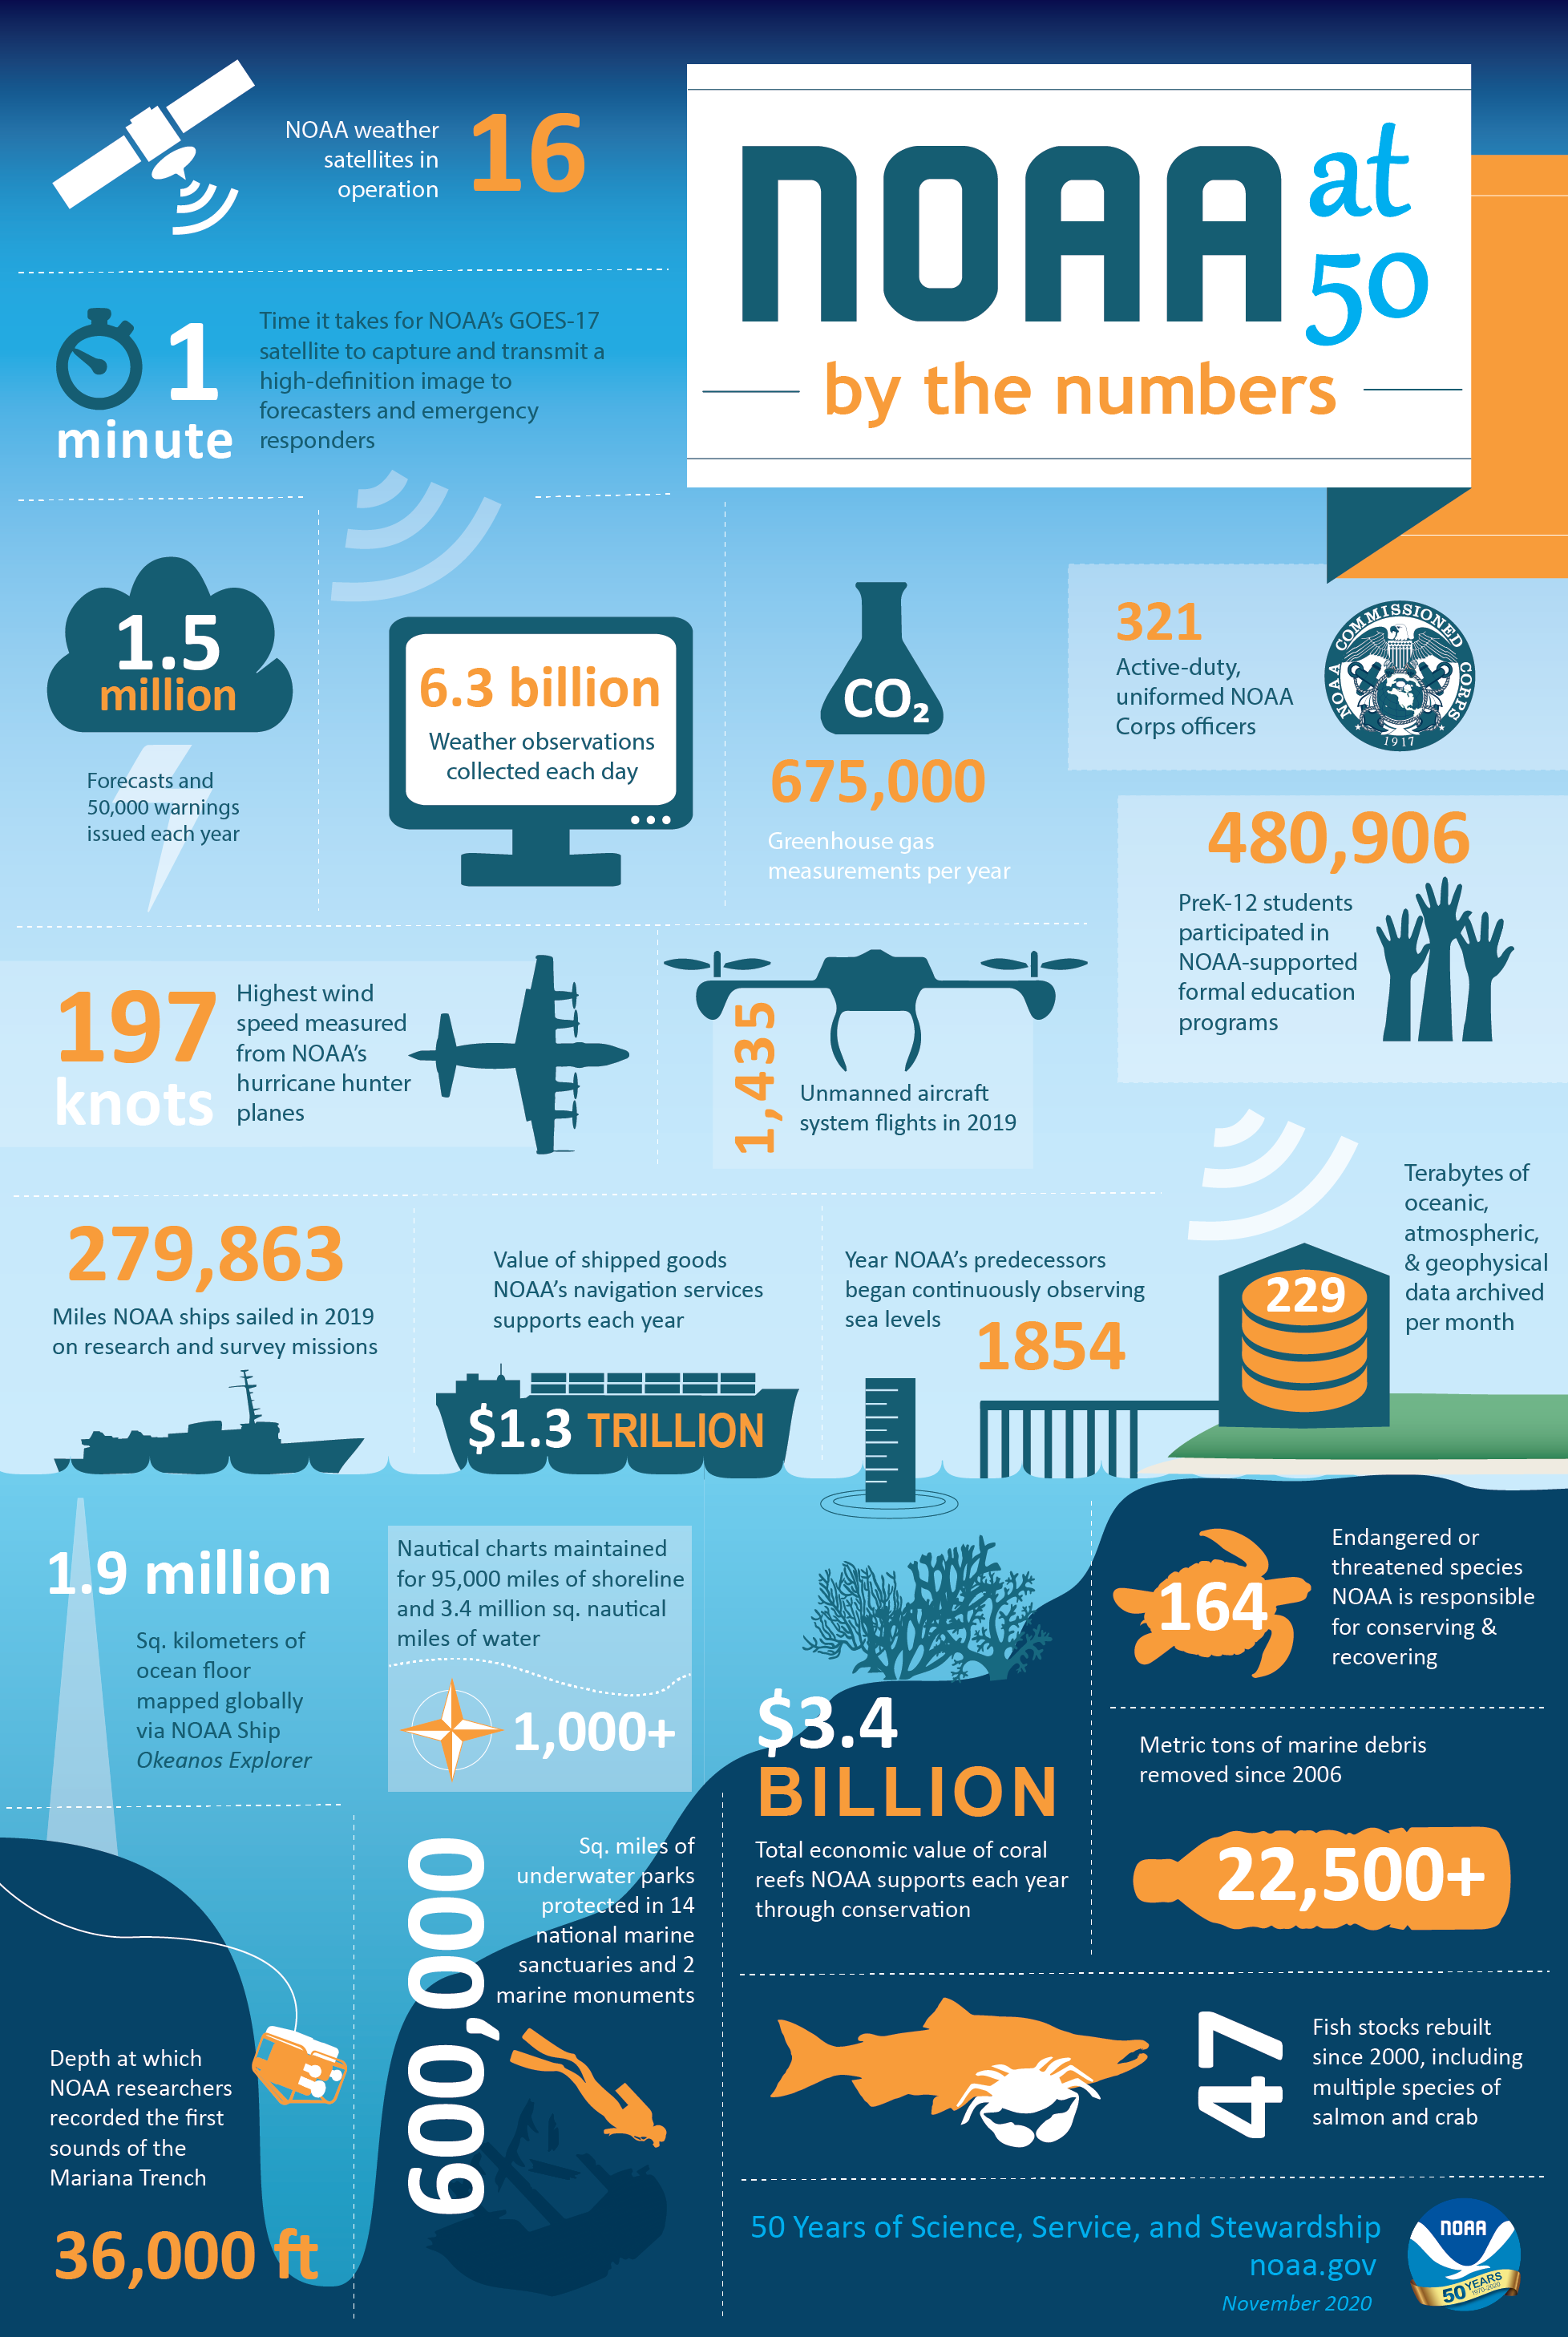 NOAA at 50: By the numbers infographic